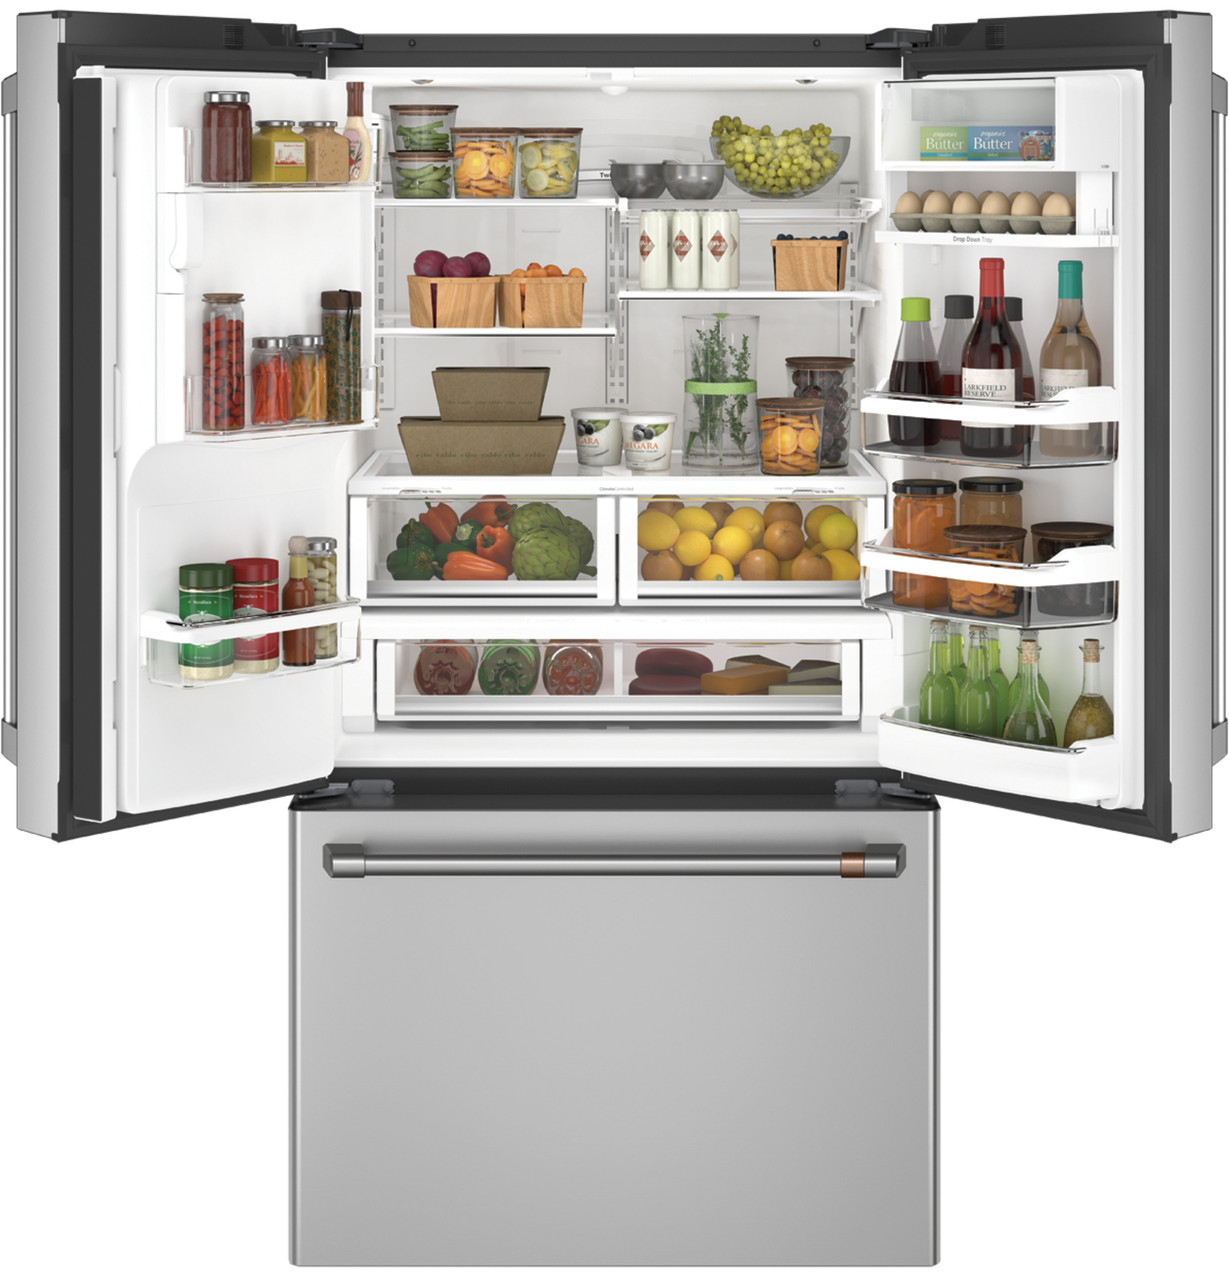 PFE28PYNFS by GE Appliances - GE Profile™ Series ENERGY STAR® 27.7 Cu. Ft.  Smart Fingerprint Resistant French-Door Refrigerator with Keurig® K-Cup®  Brewing System